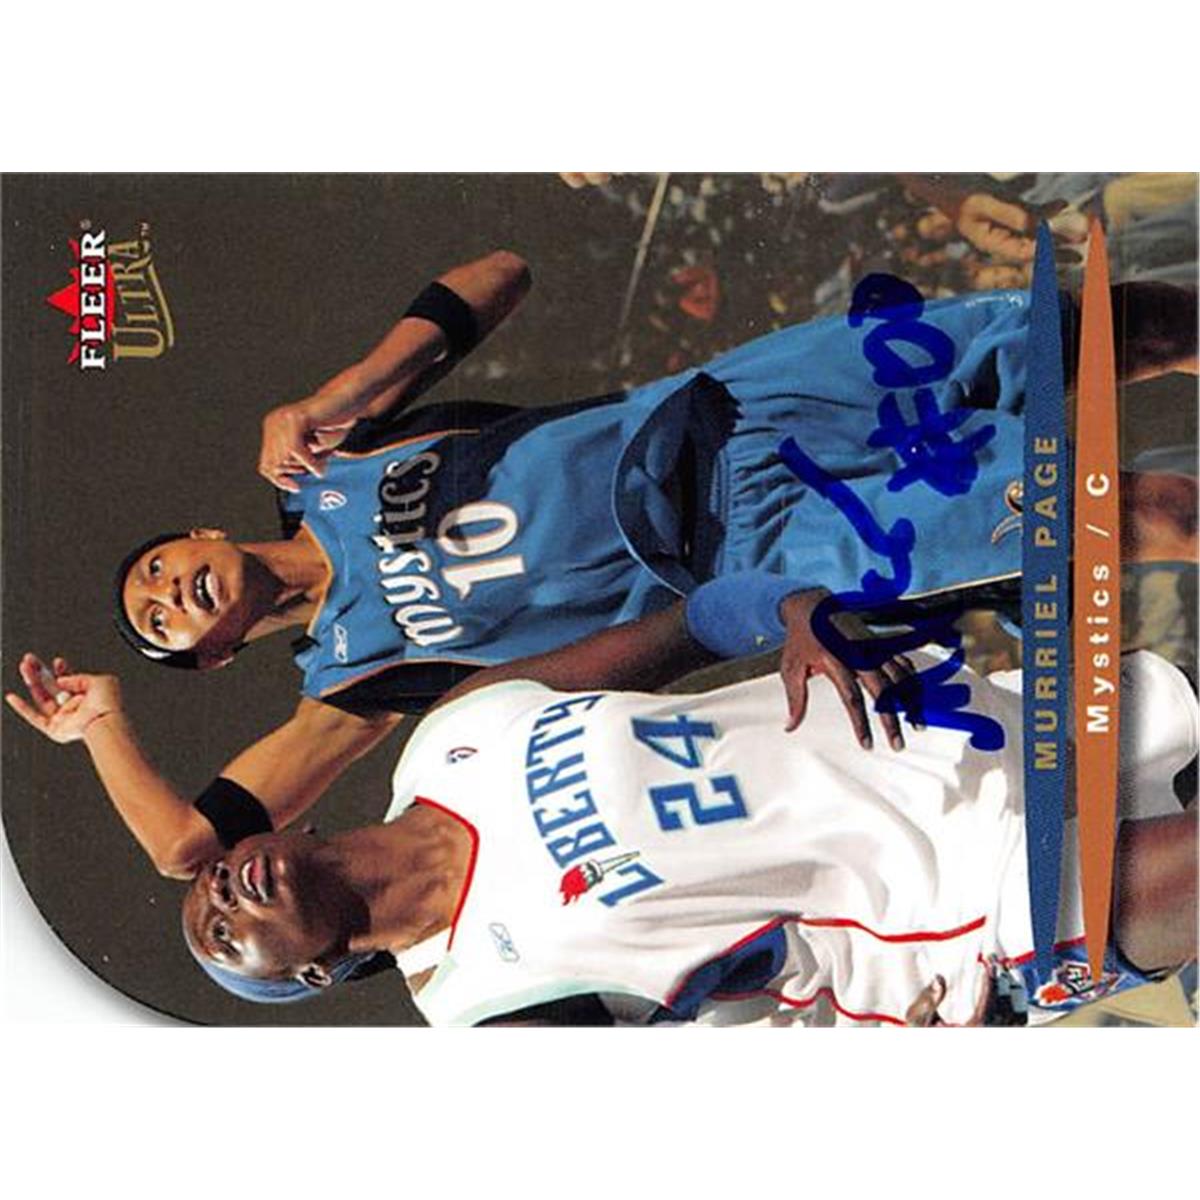 Picture of Autograph Warehouse 444564 2003 Fleer Ultra 47 Murriel Page Autographed Basketball Card